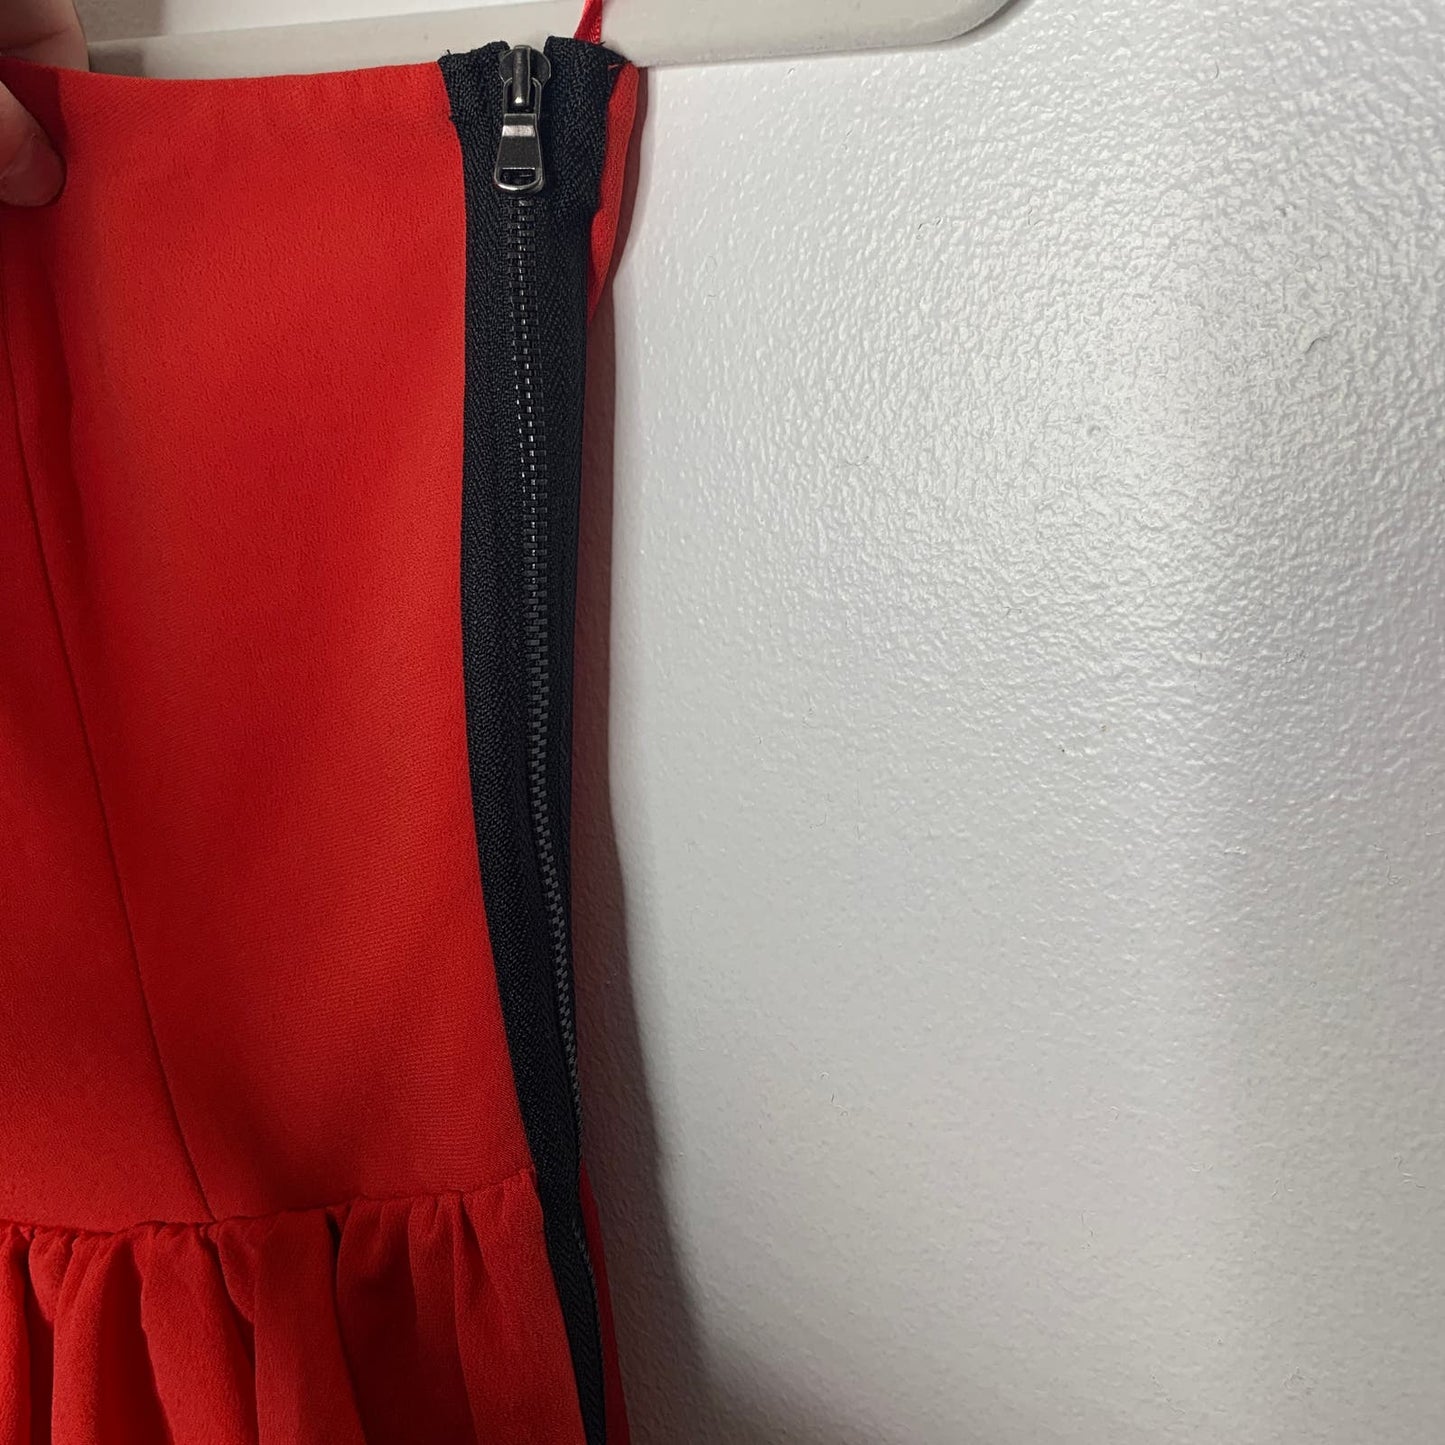 Red strapless sweetheart cocktail dress SZ 2